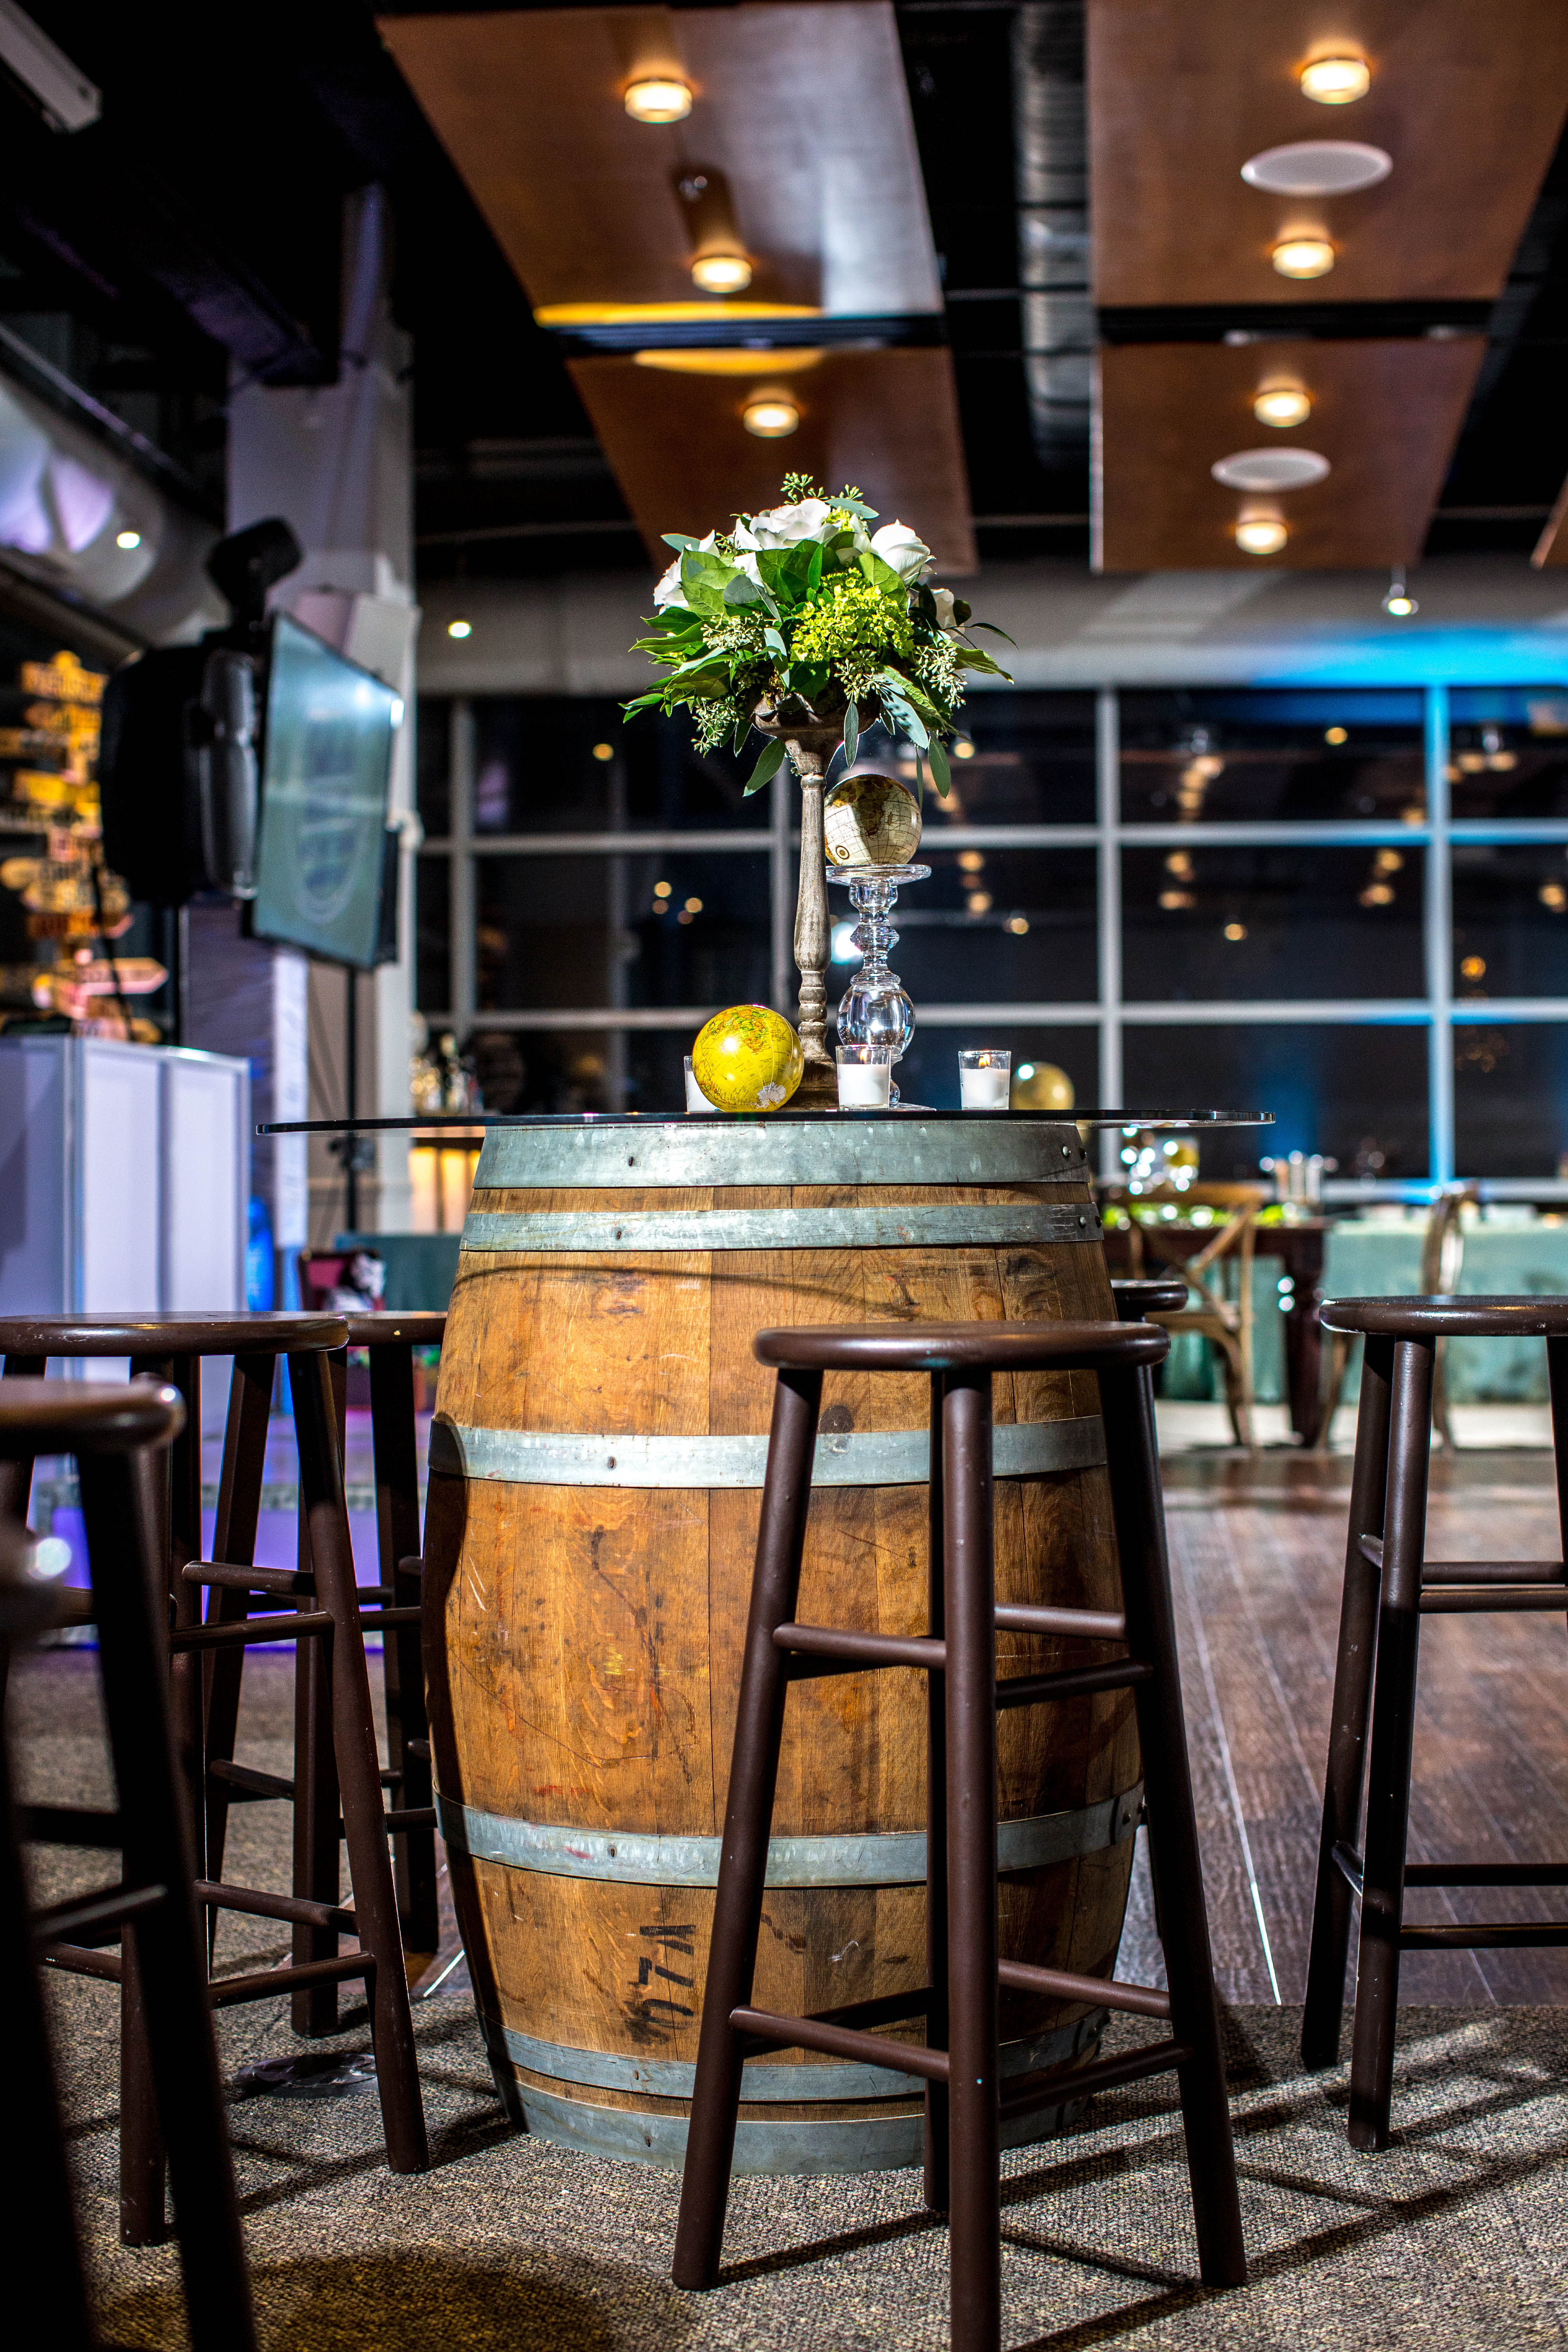 Barrel high tops, flowers and globe centerpieces for Gabriela's global, vintage travel Bat Mitzvah party at VisArts in Rockville, Maryland | Pop Color Events | Adding a Pop of Color to Bar & Bat Mitzvahs in DC, MD & VA | Photo by Michael Temchine Photography